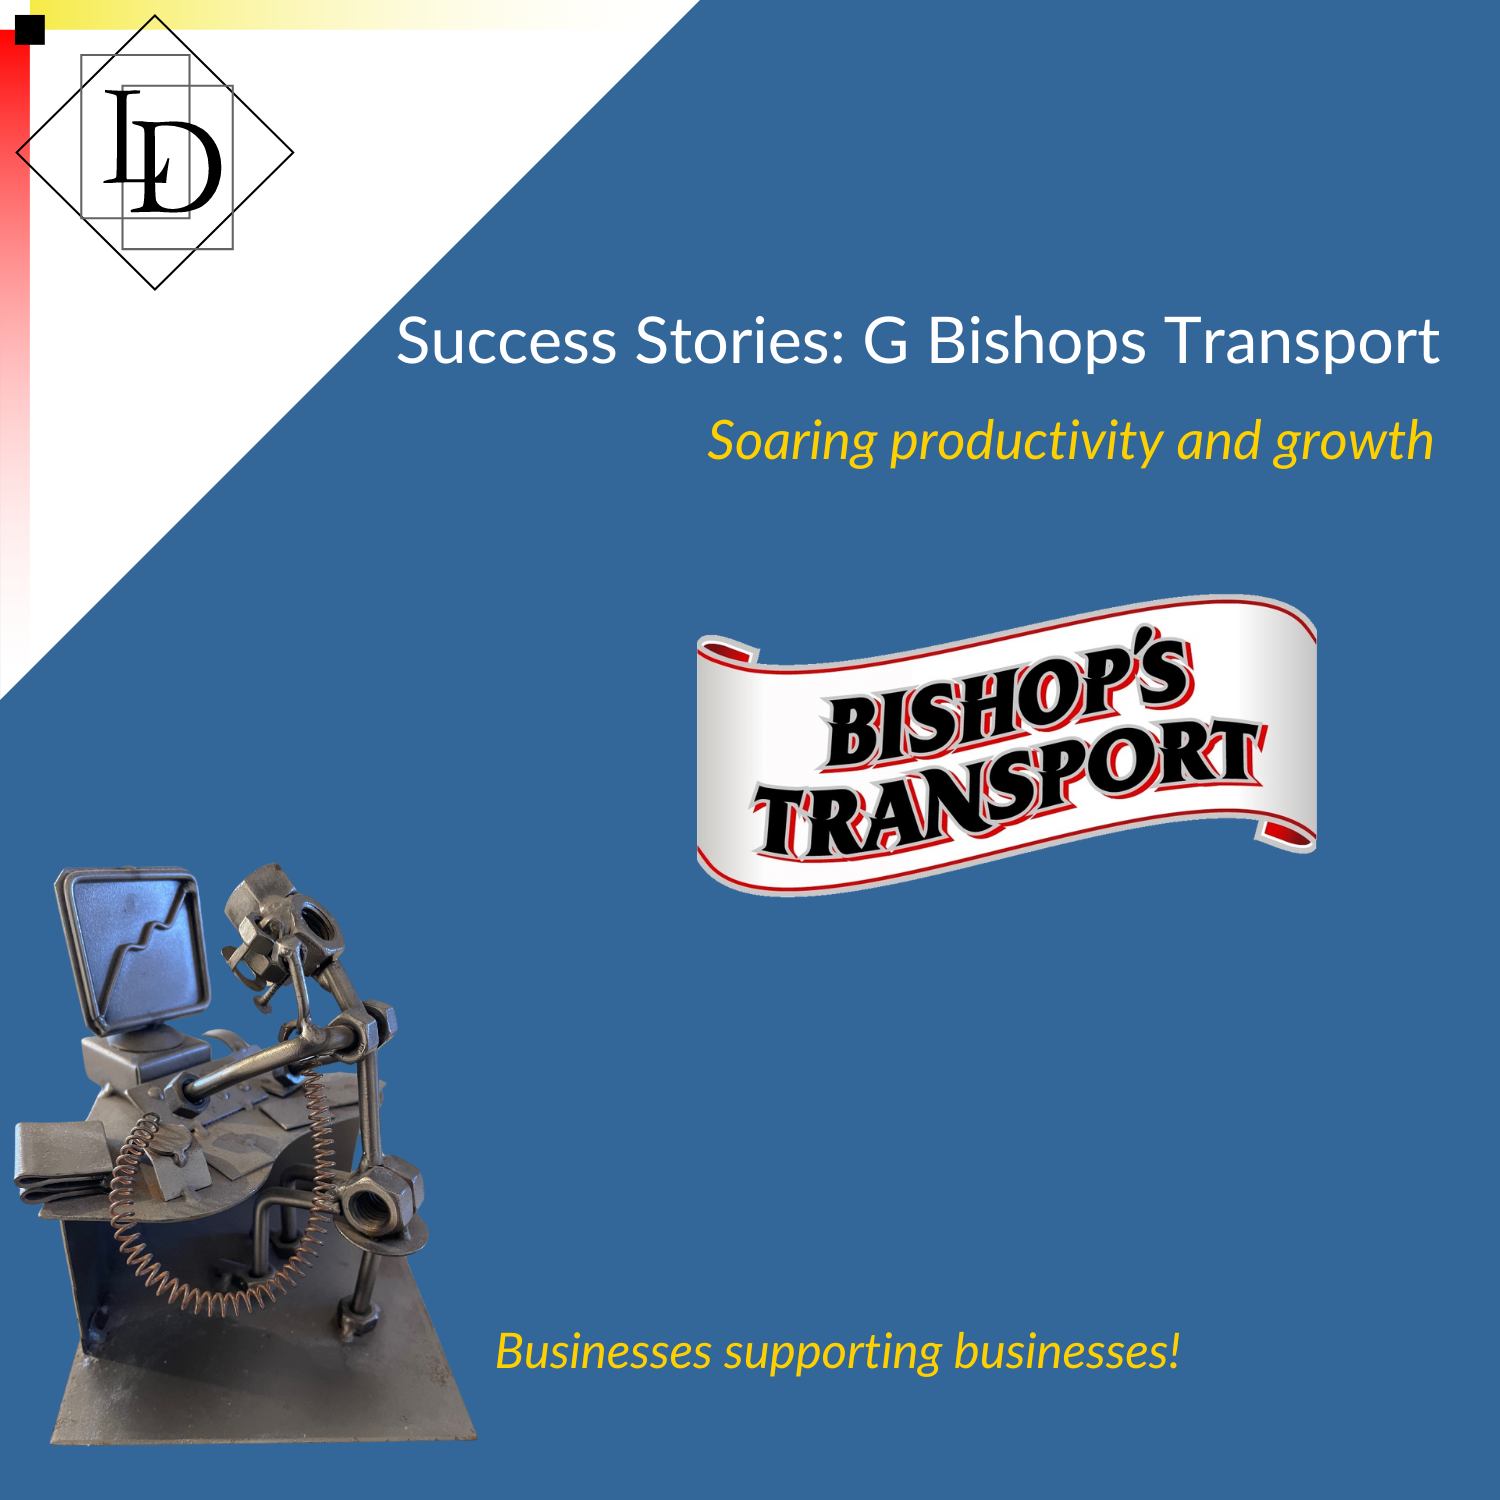 Logical Developments logo.  Bishops Transport logo. Title Success Stories - G Bishops Transport, soaring productivity and growth.  Figurine of a man sitting at a computer, made out of scrap metal.  Tagline "businesses supporting businesses"